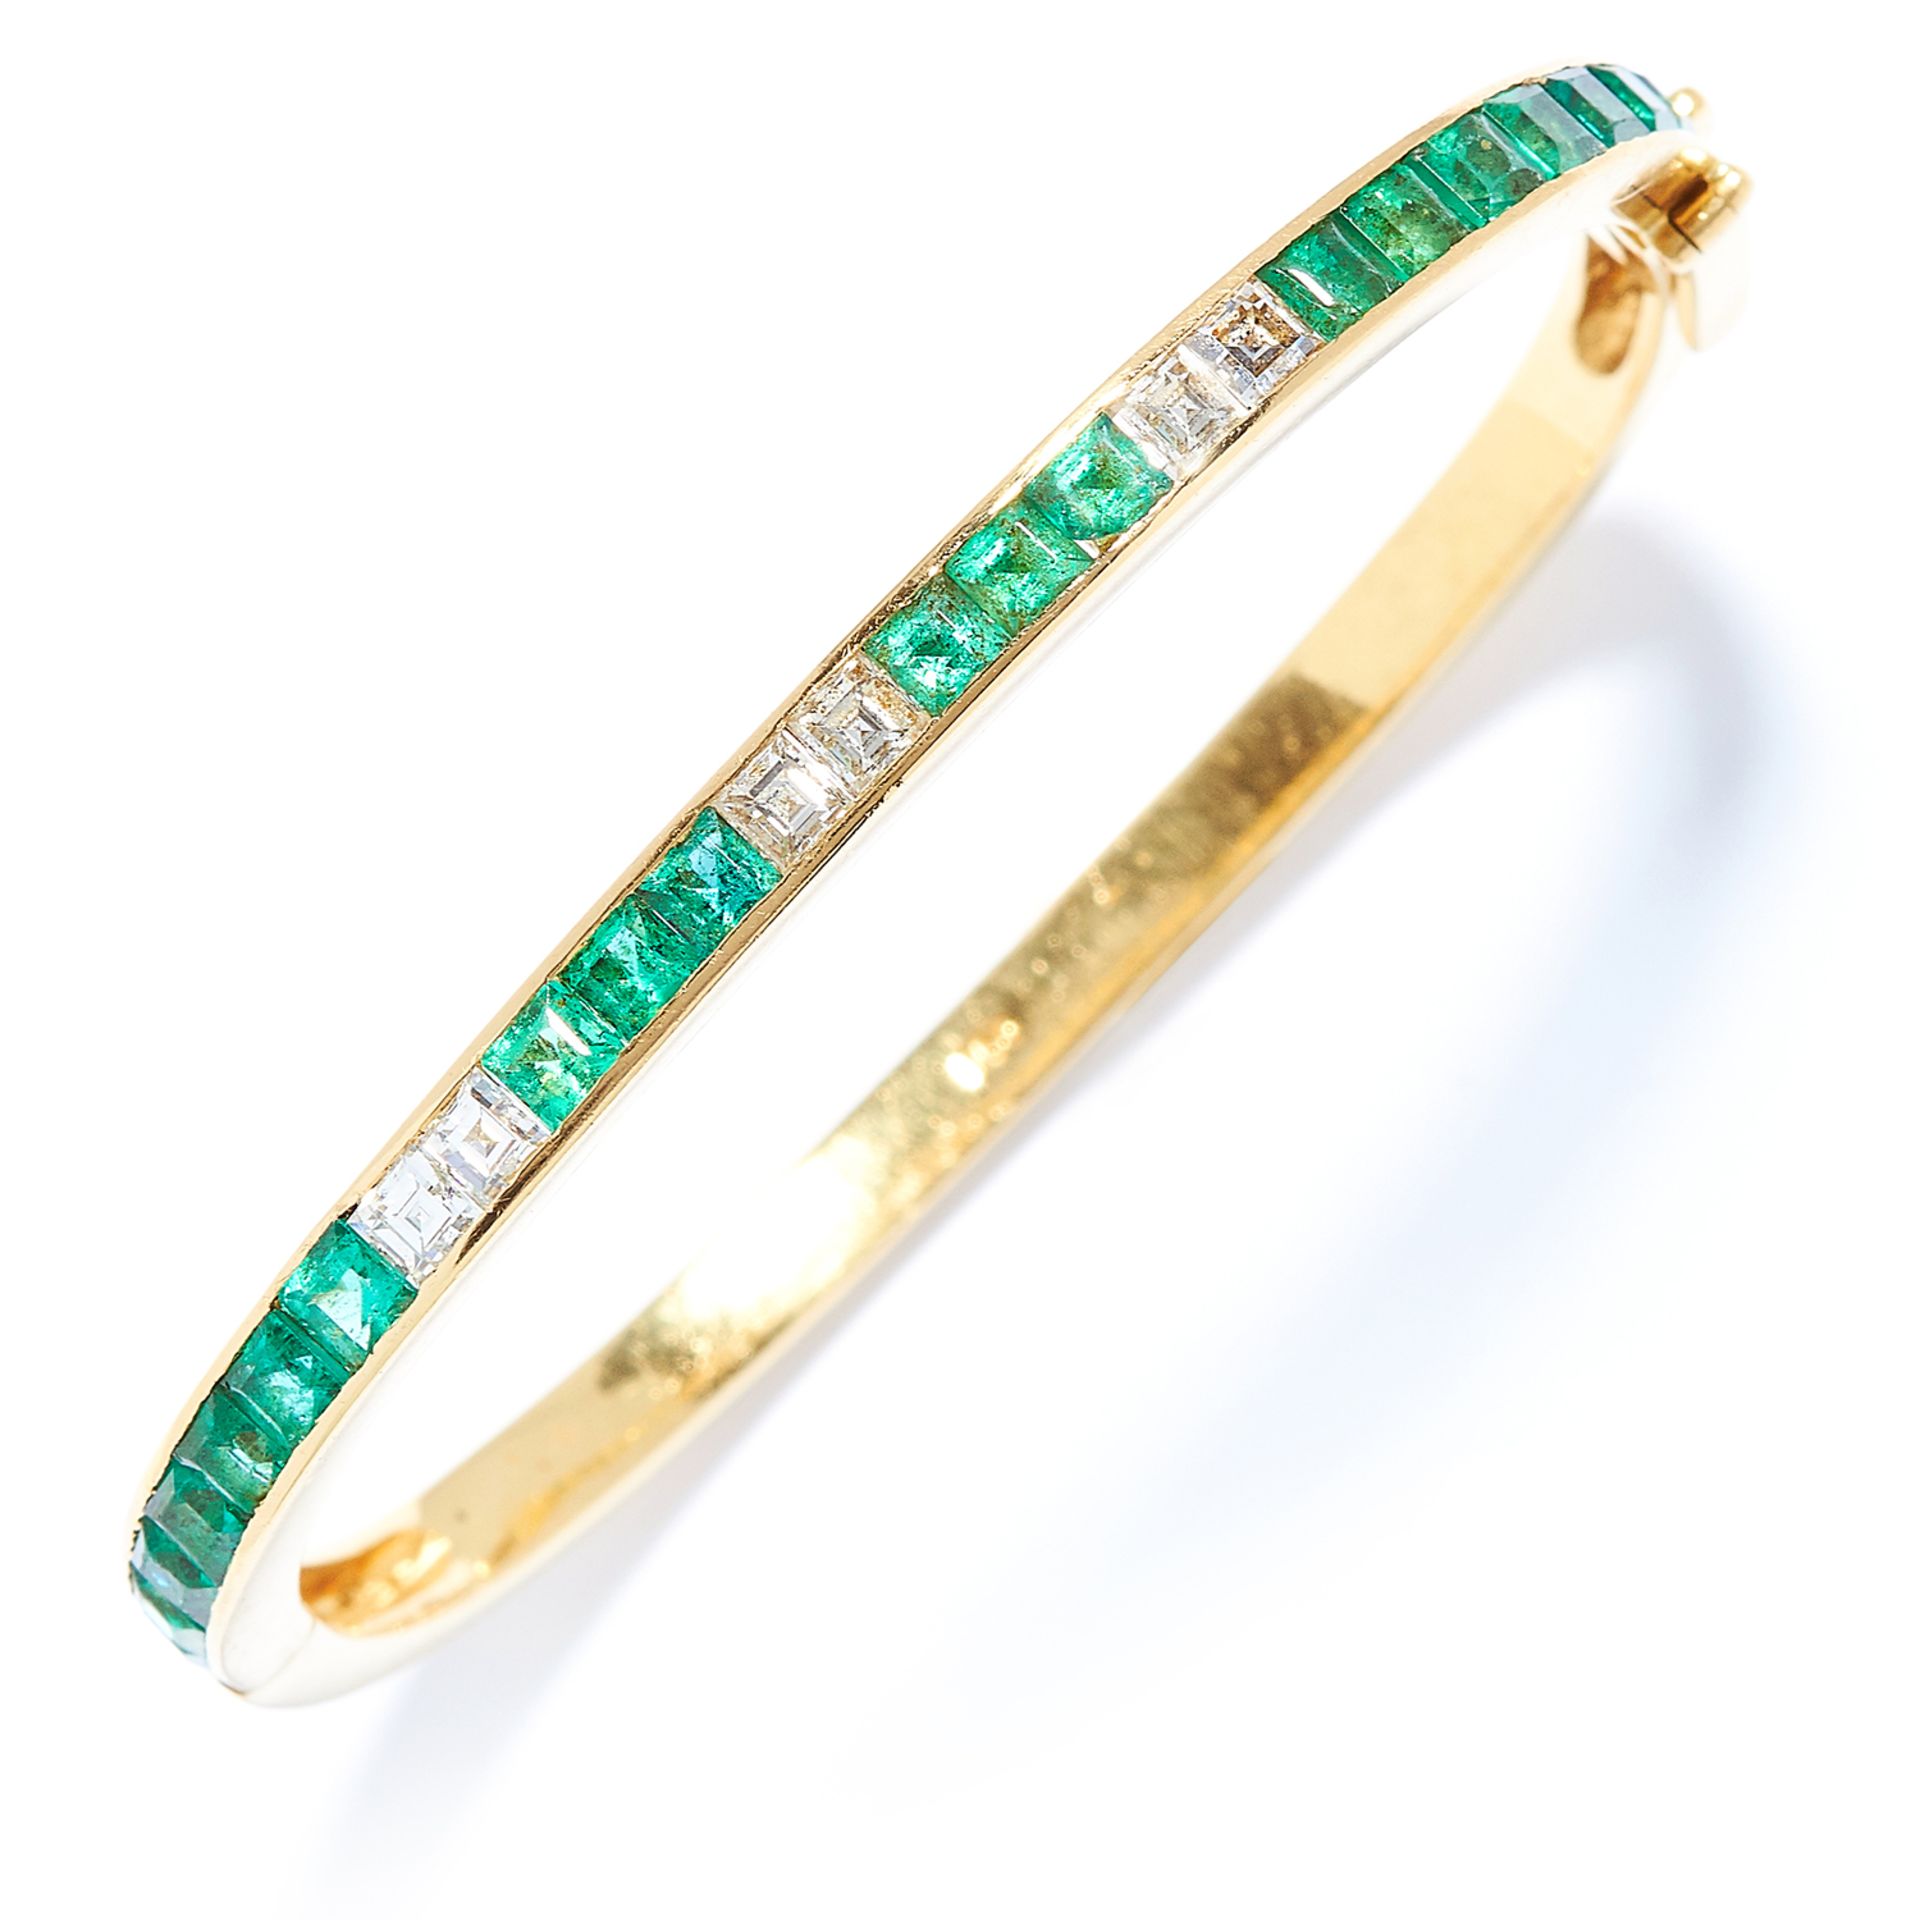 3.60 CARAT EMERALD AND DIAMOND BANGLE in 18ct yellow gold, set with square cut emeralds totalling